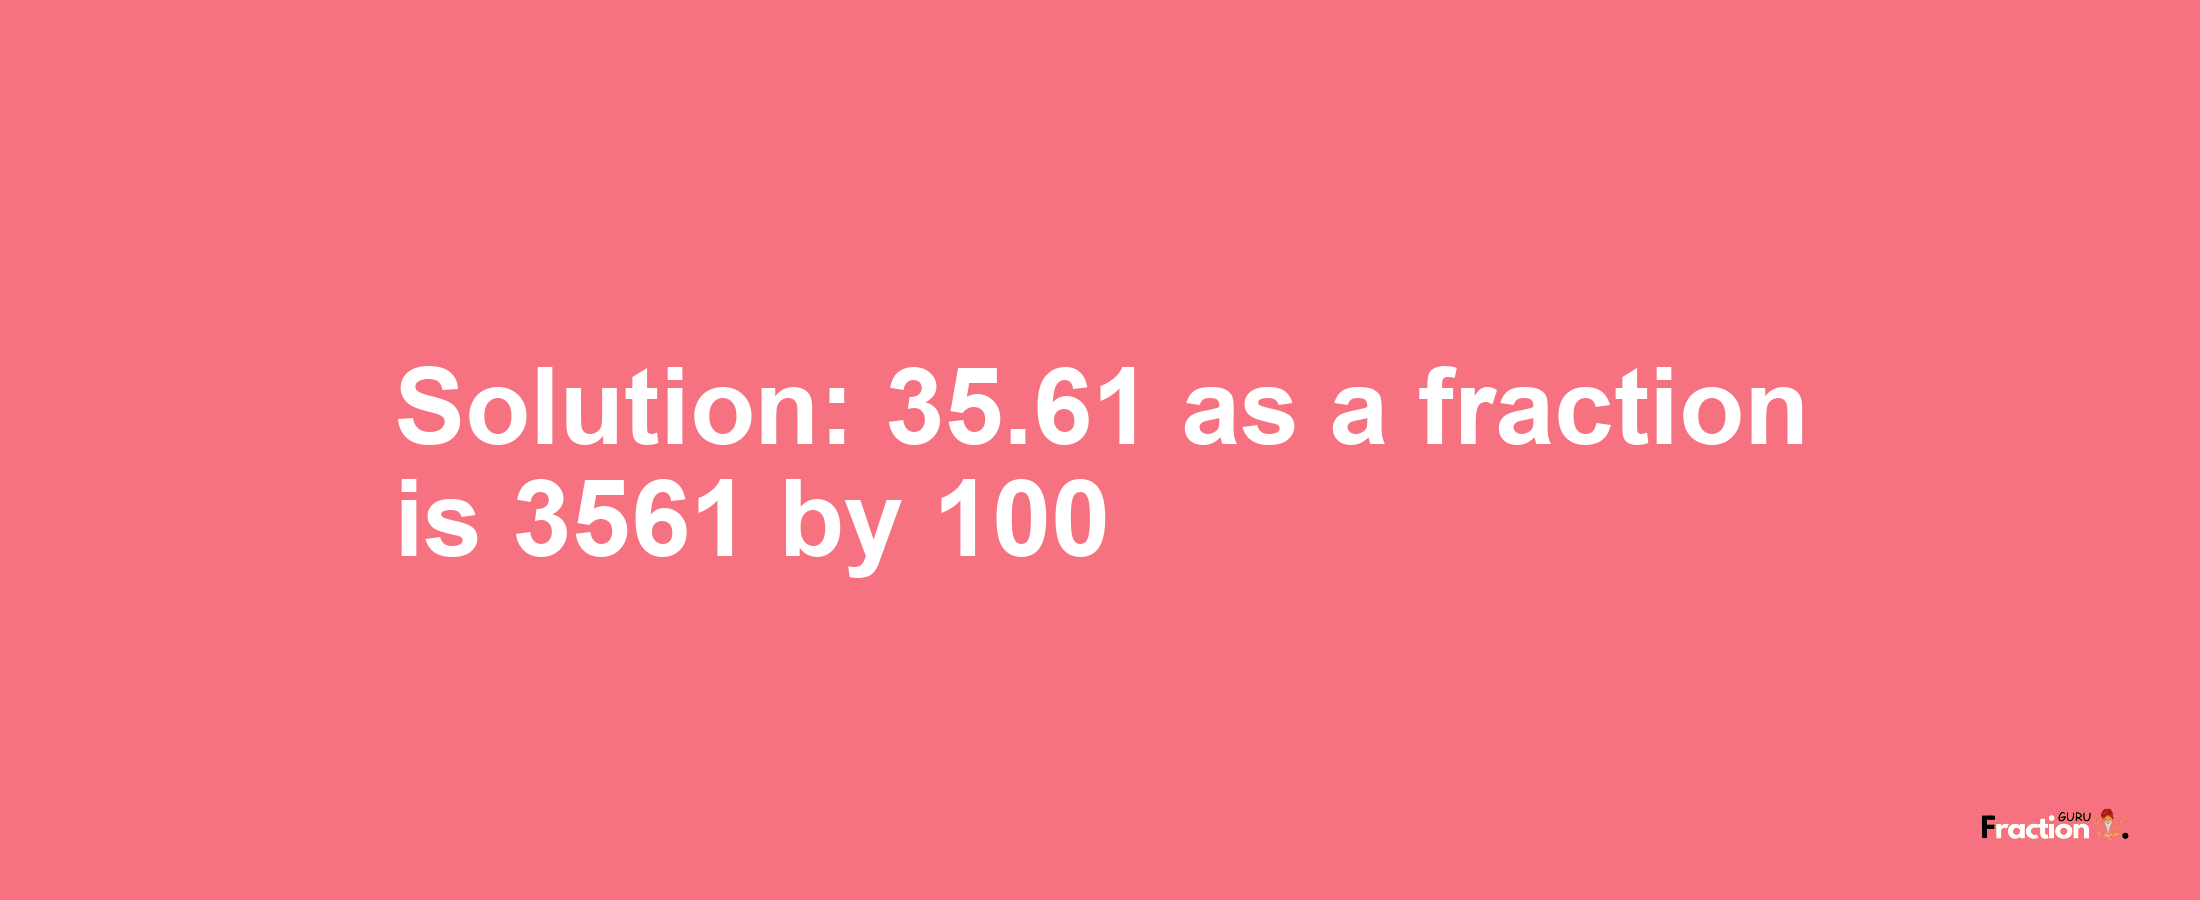 Solution:35.61 as a fraction is 3561/100